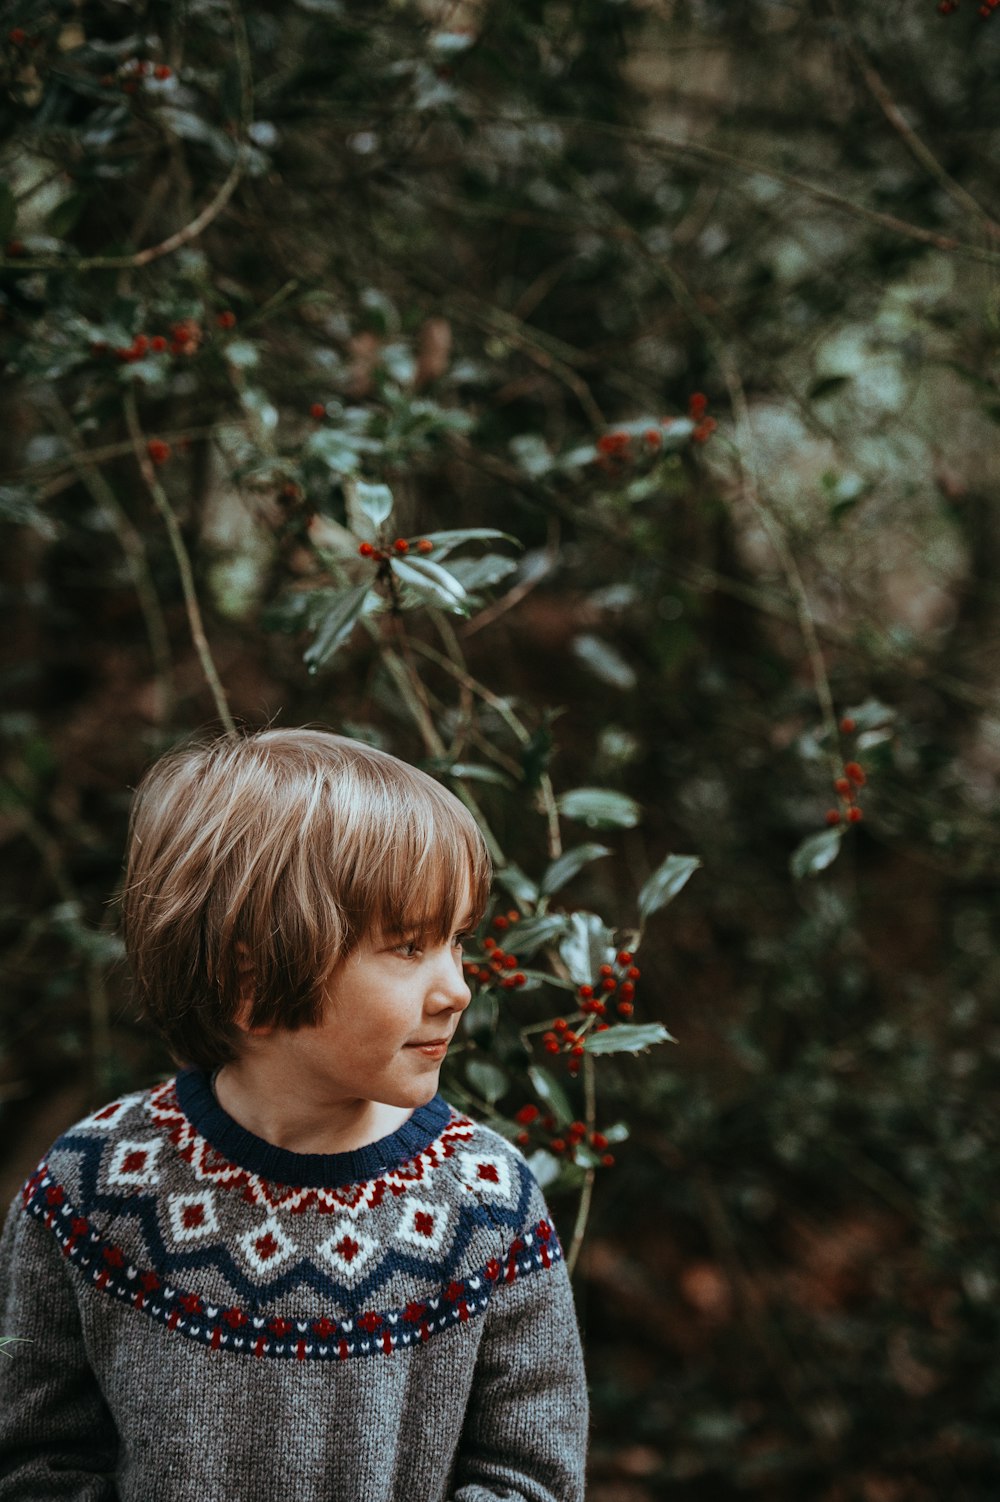 boy standing in front of plants with red berries during daytime